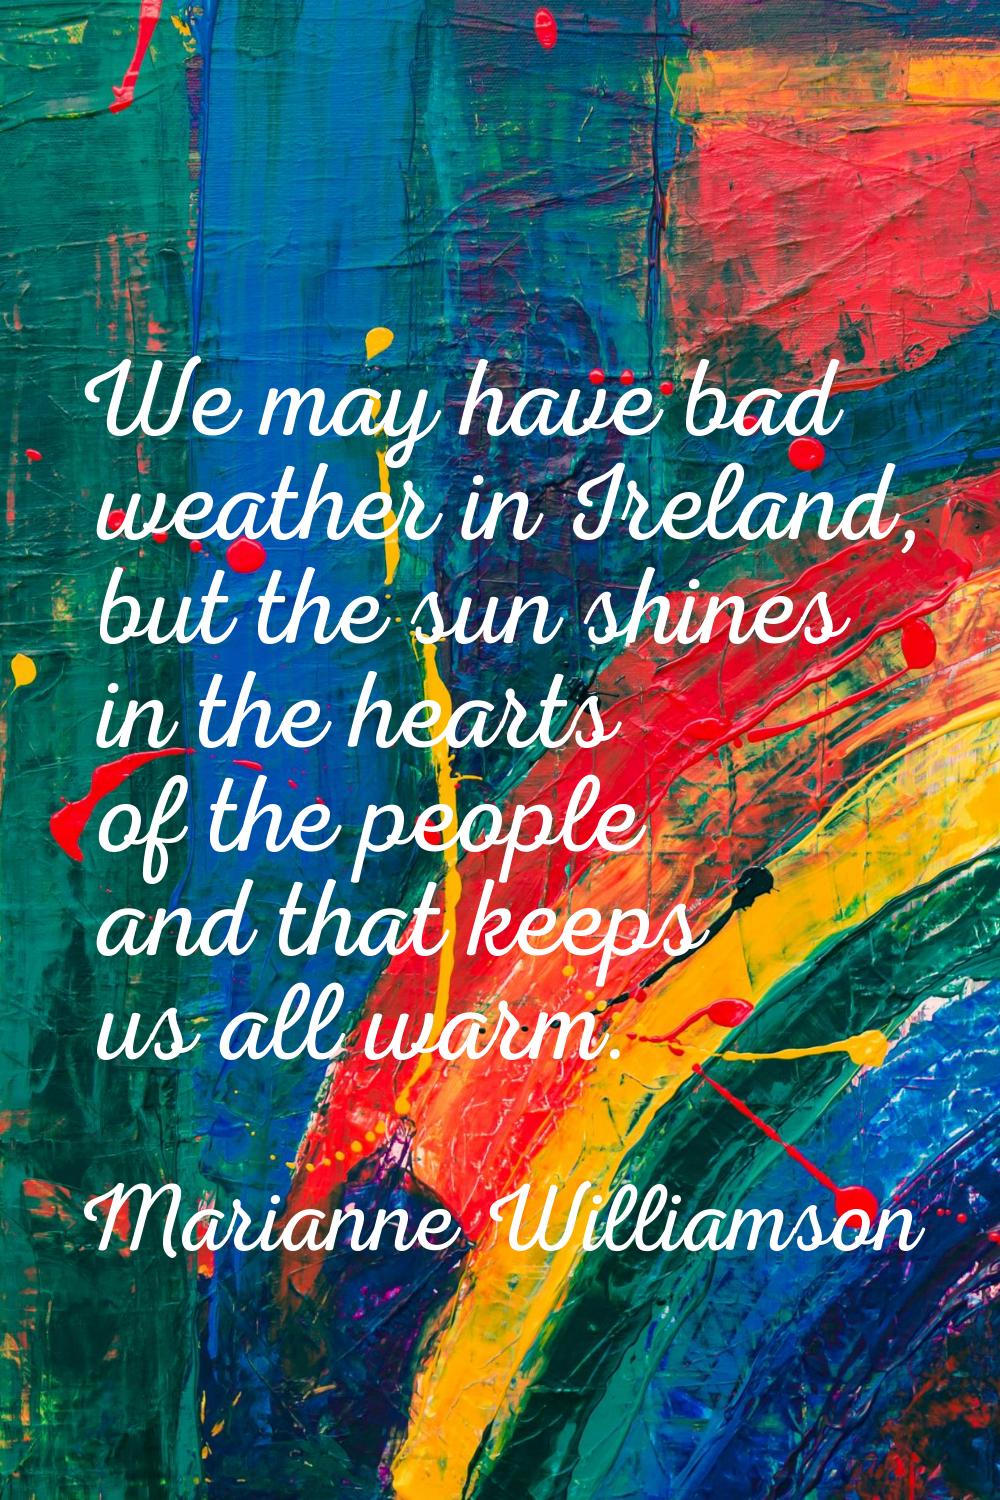 We may have bad weather in Ireland, but the sun shines in the hearts of the people and that keeps u